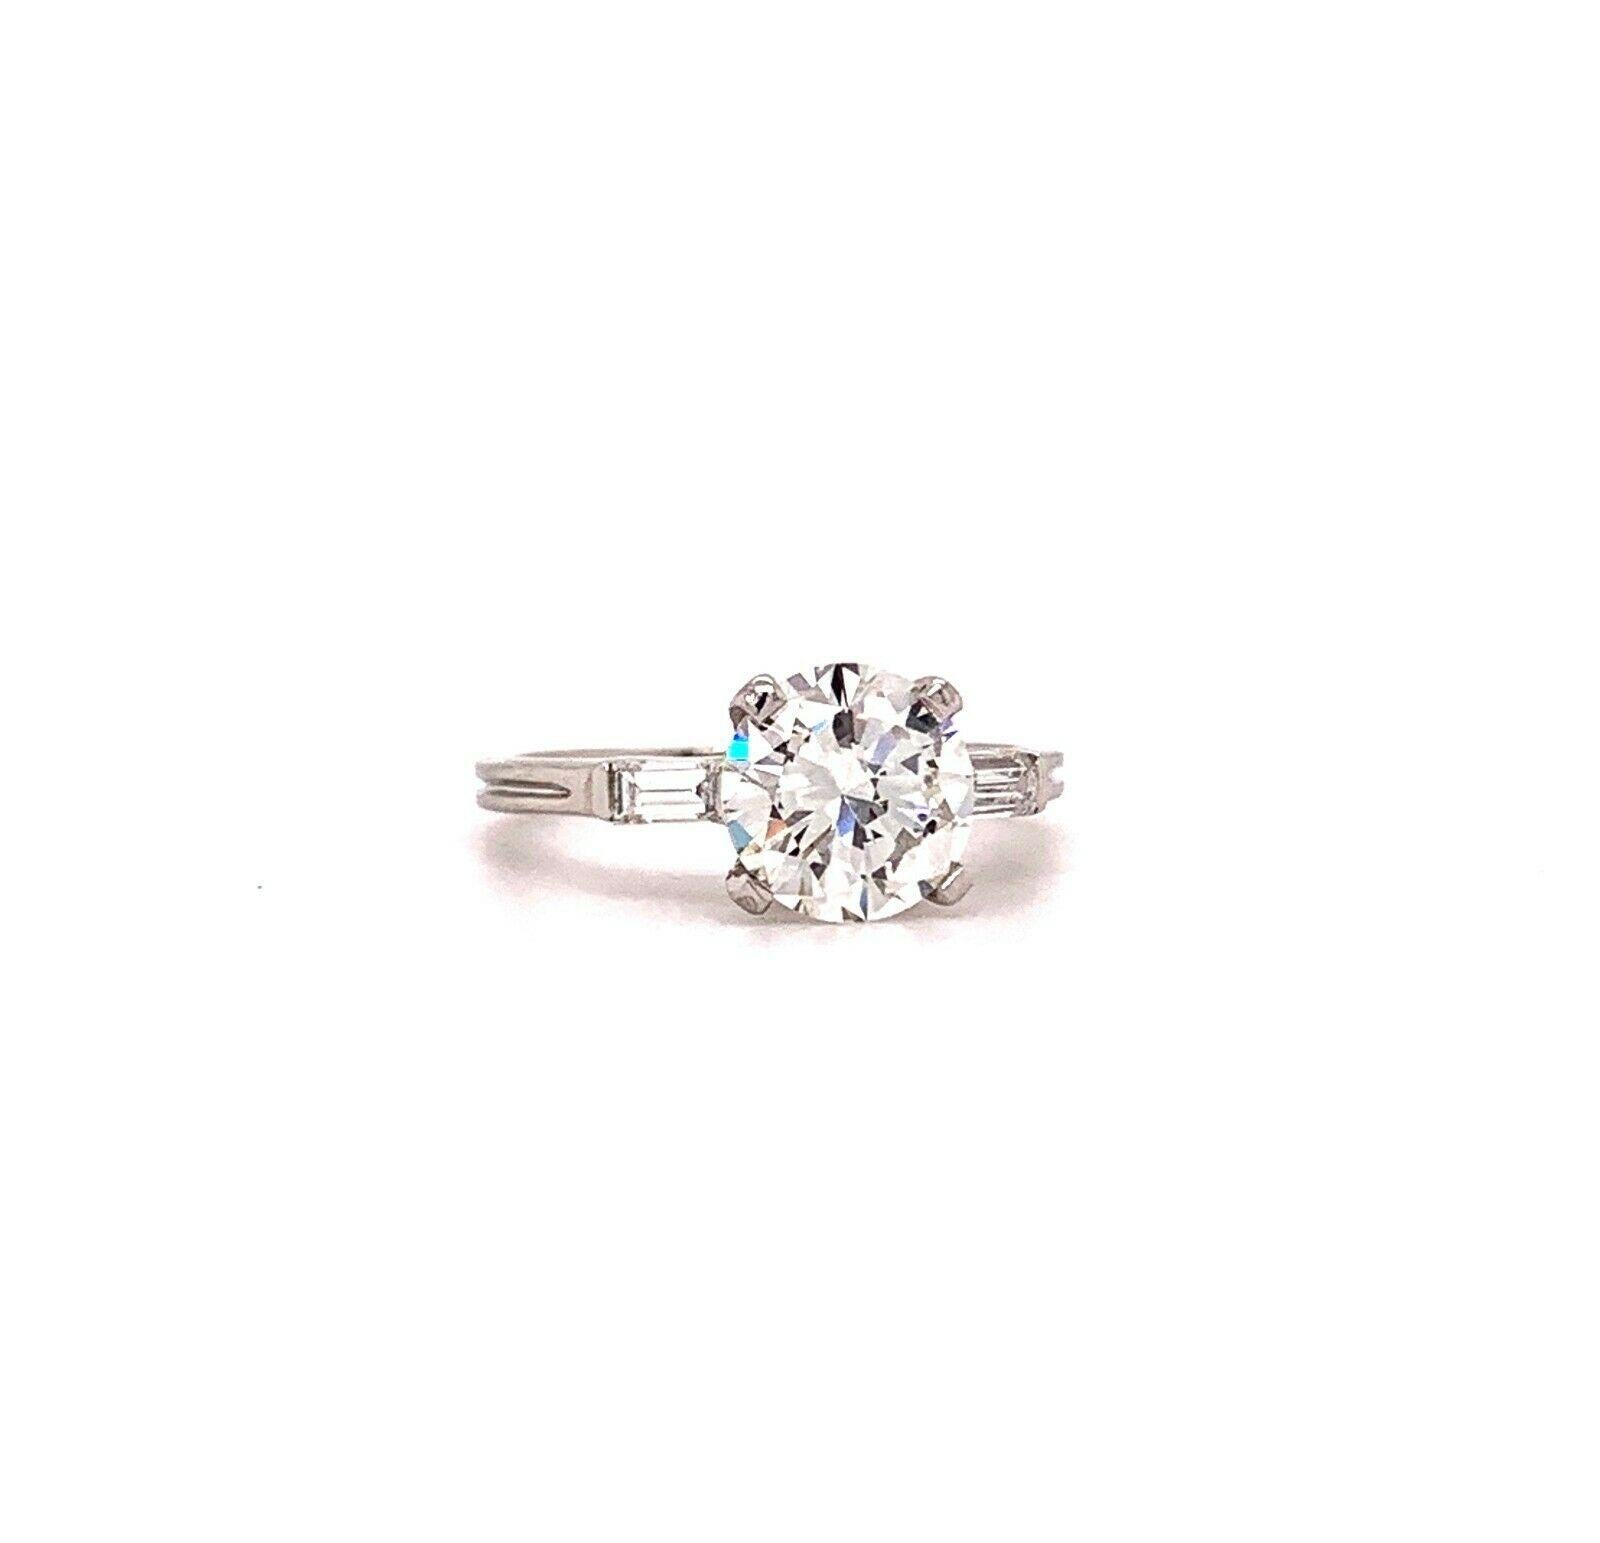 Vintage Tiffany & Co. Round Diamond 1.72 Carat Engagement Ring GIA H VS2 For Sale 5